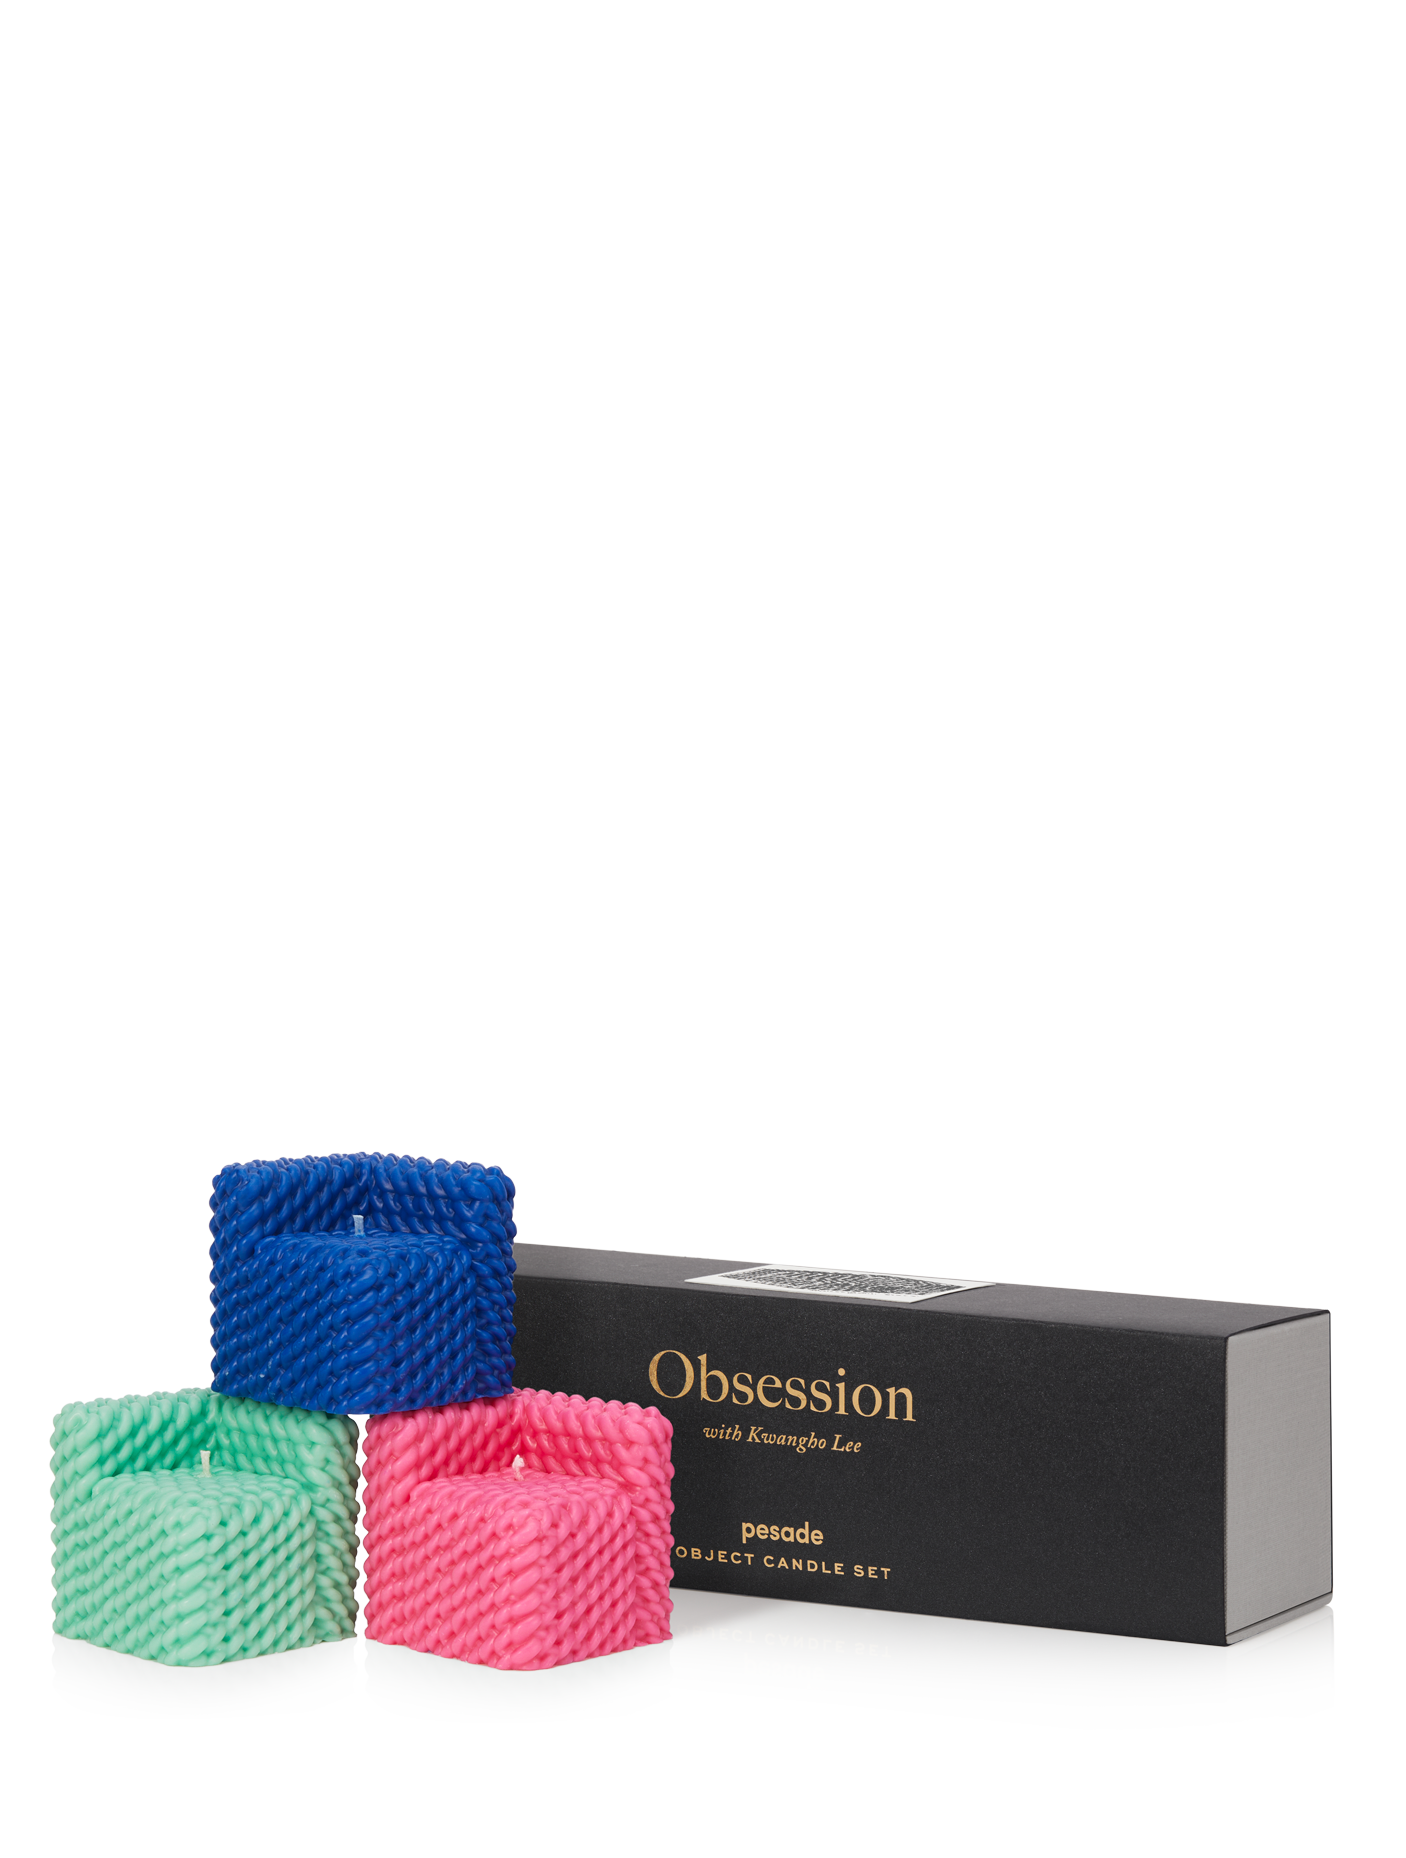 Pesade | Obsession object candle - Set